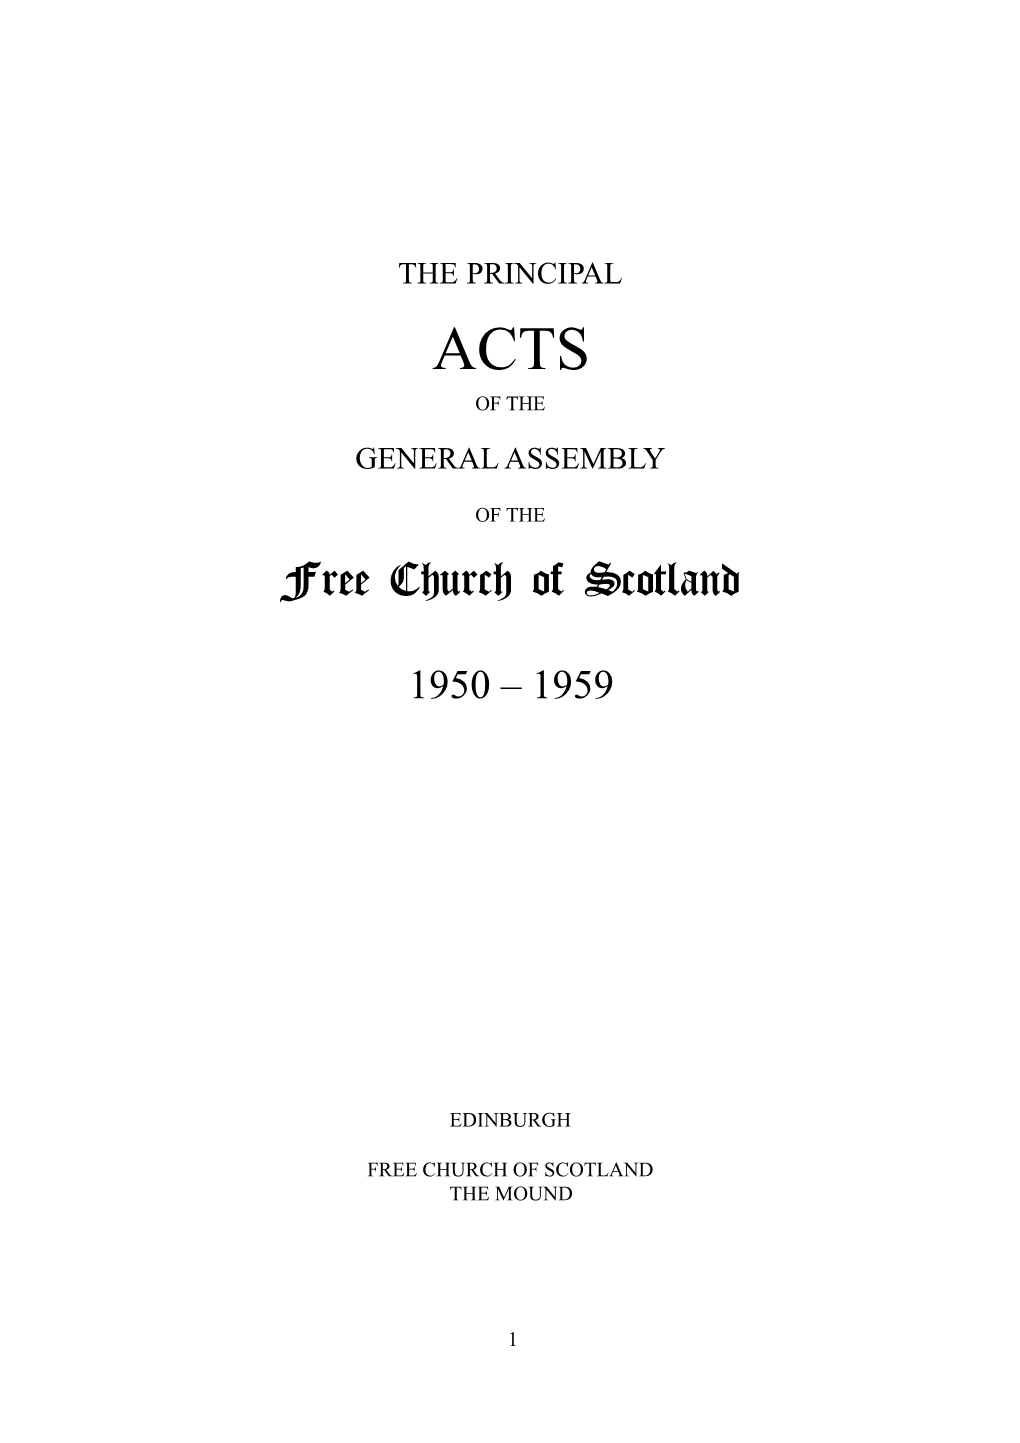 Acts 1950-1959